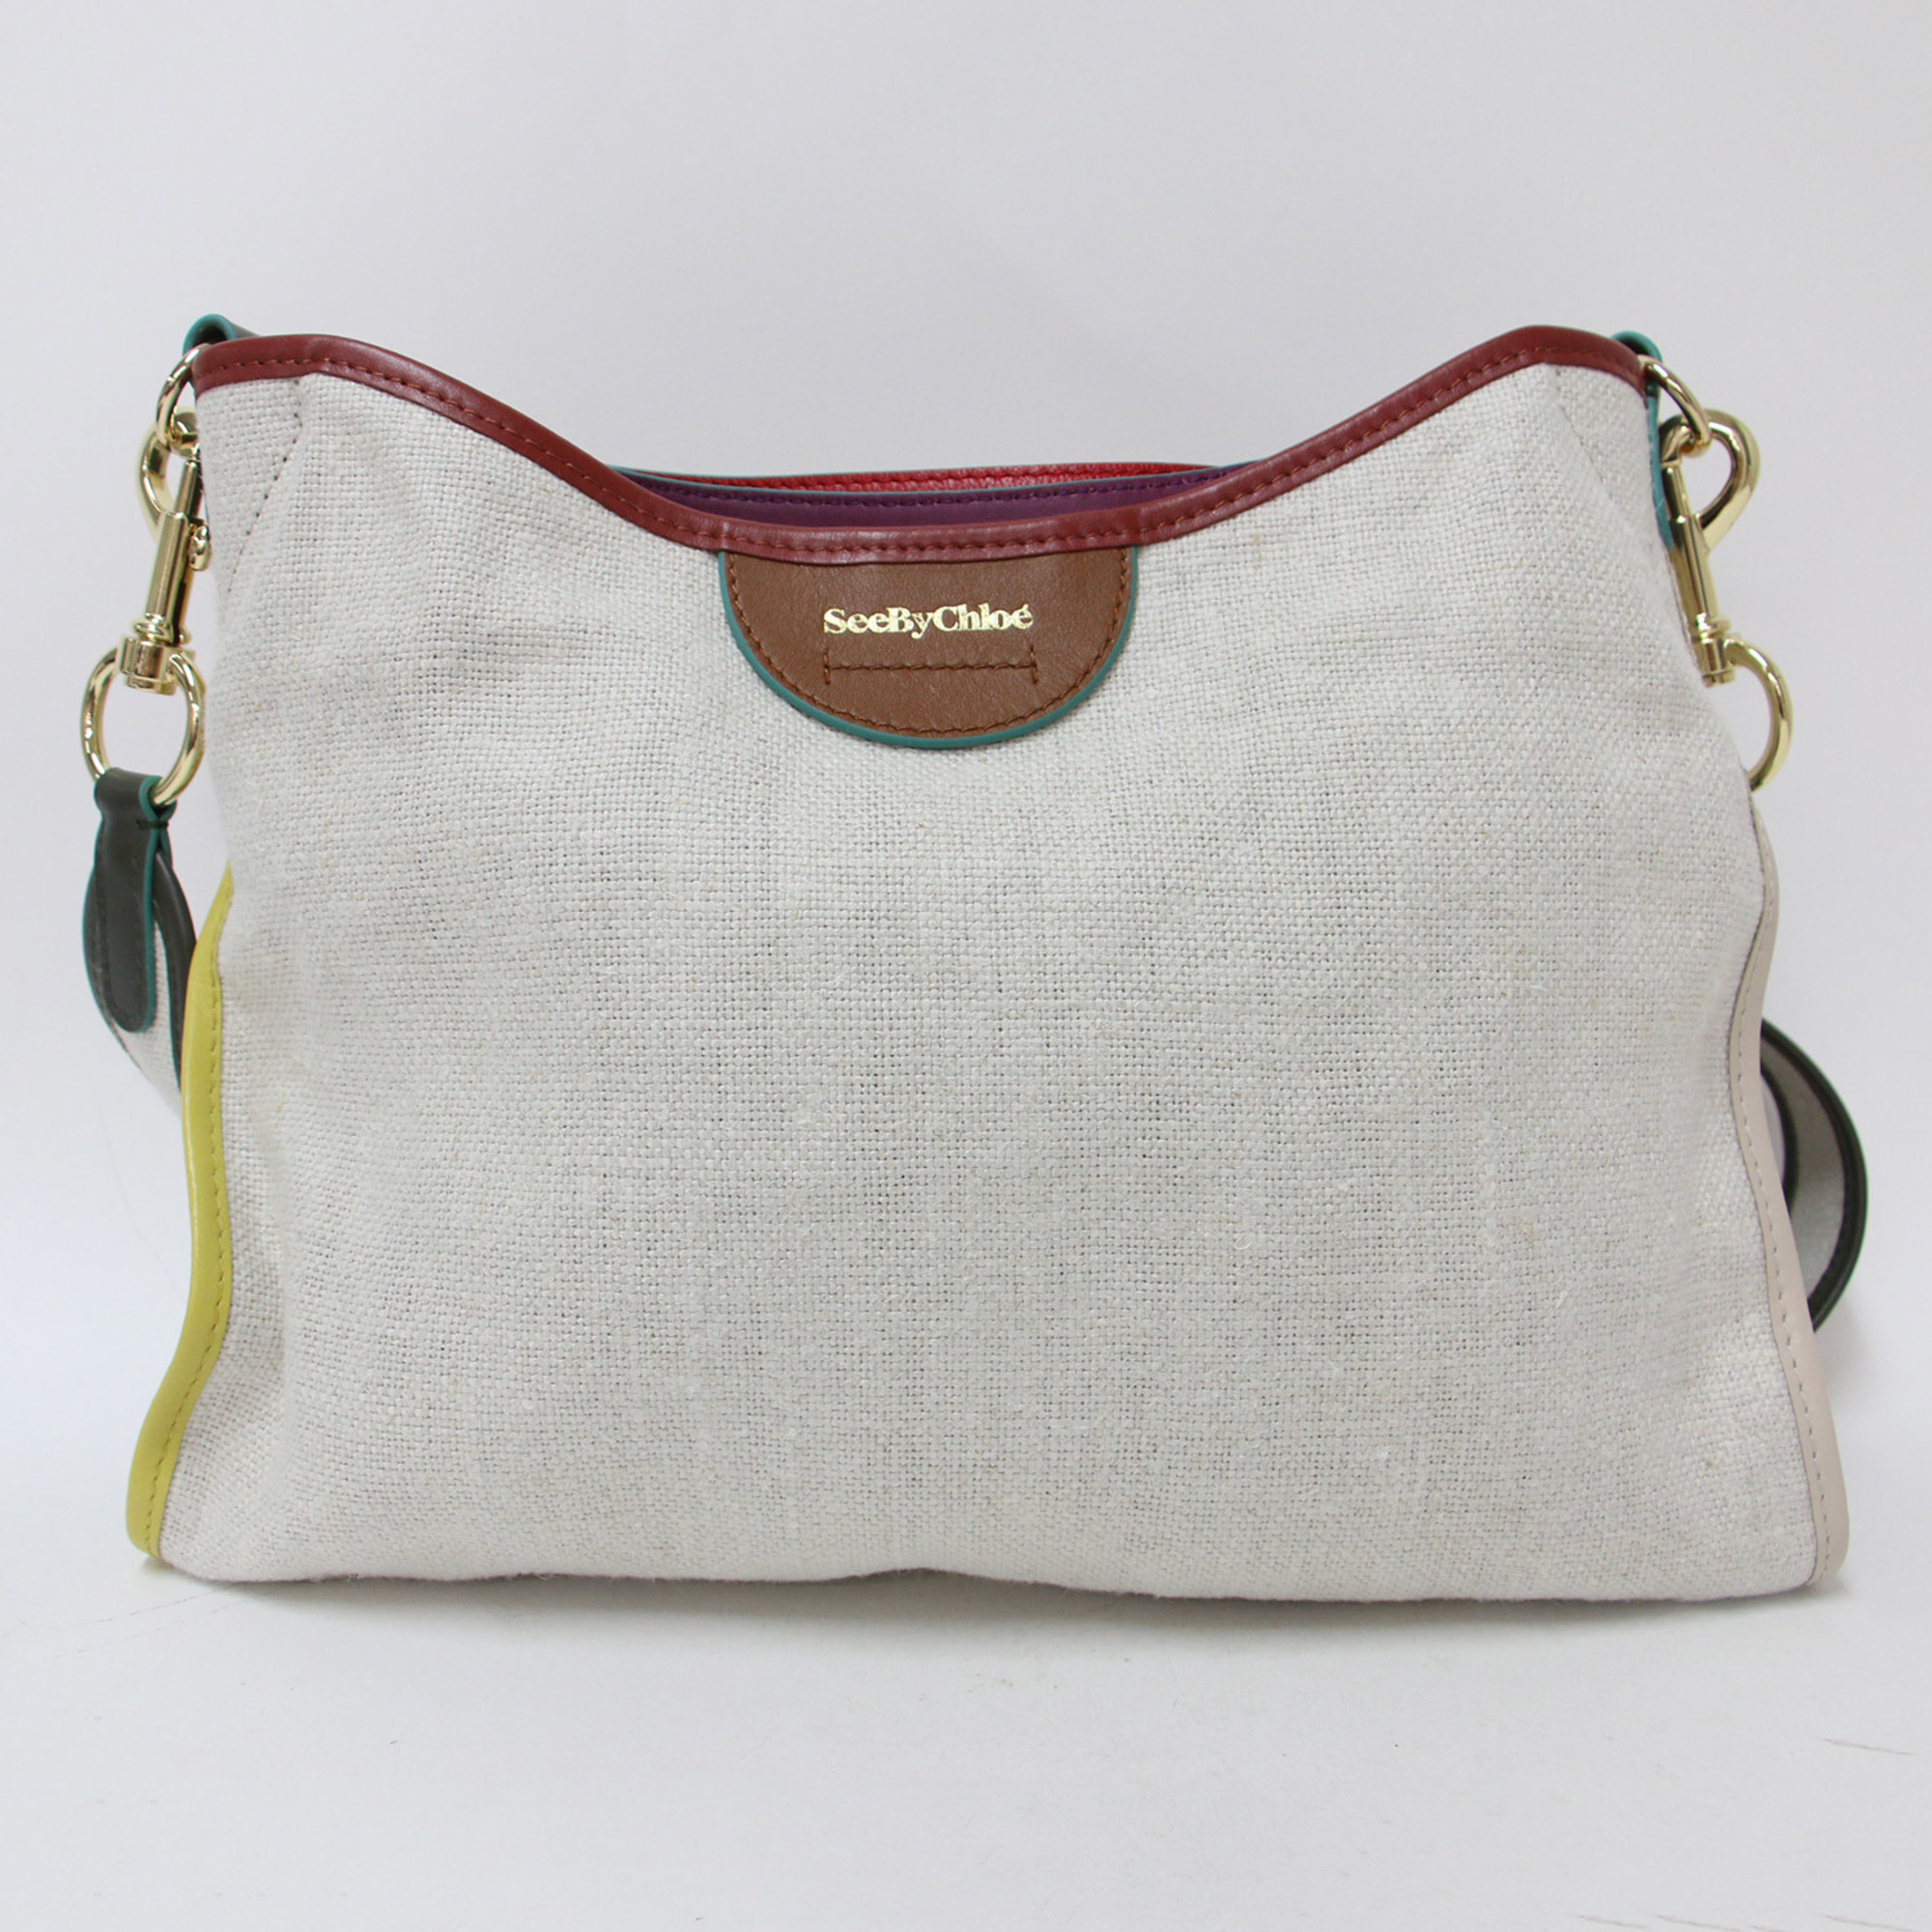 See by Chloé SEE BY CHLOE Shoulder Bag Light Beige 23 JOAN SBC Linen with Piping Leather Women's